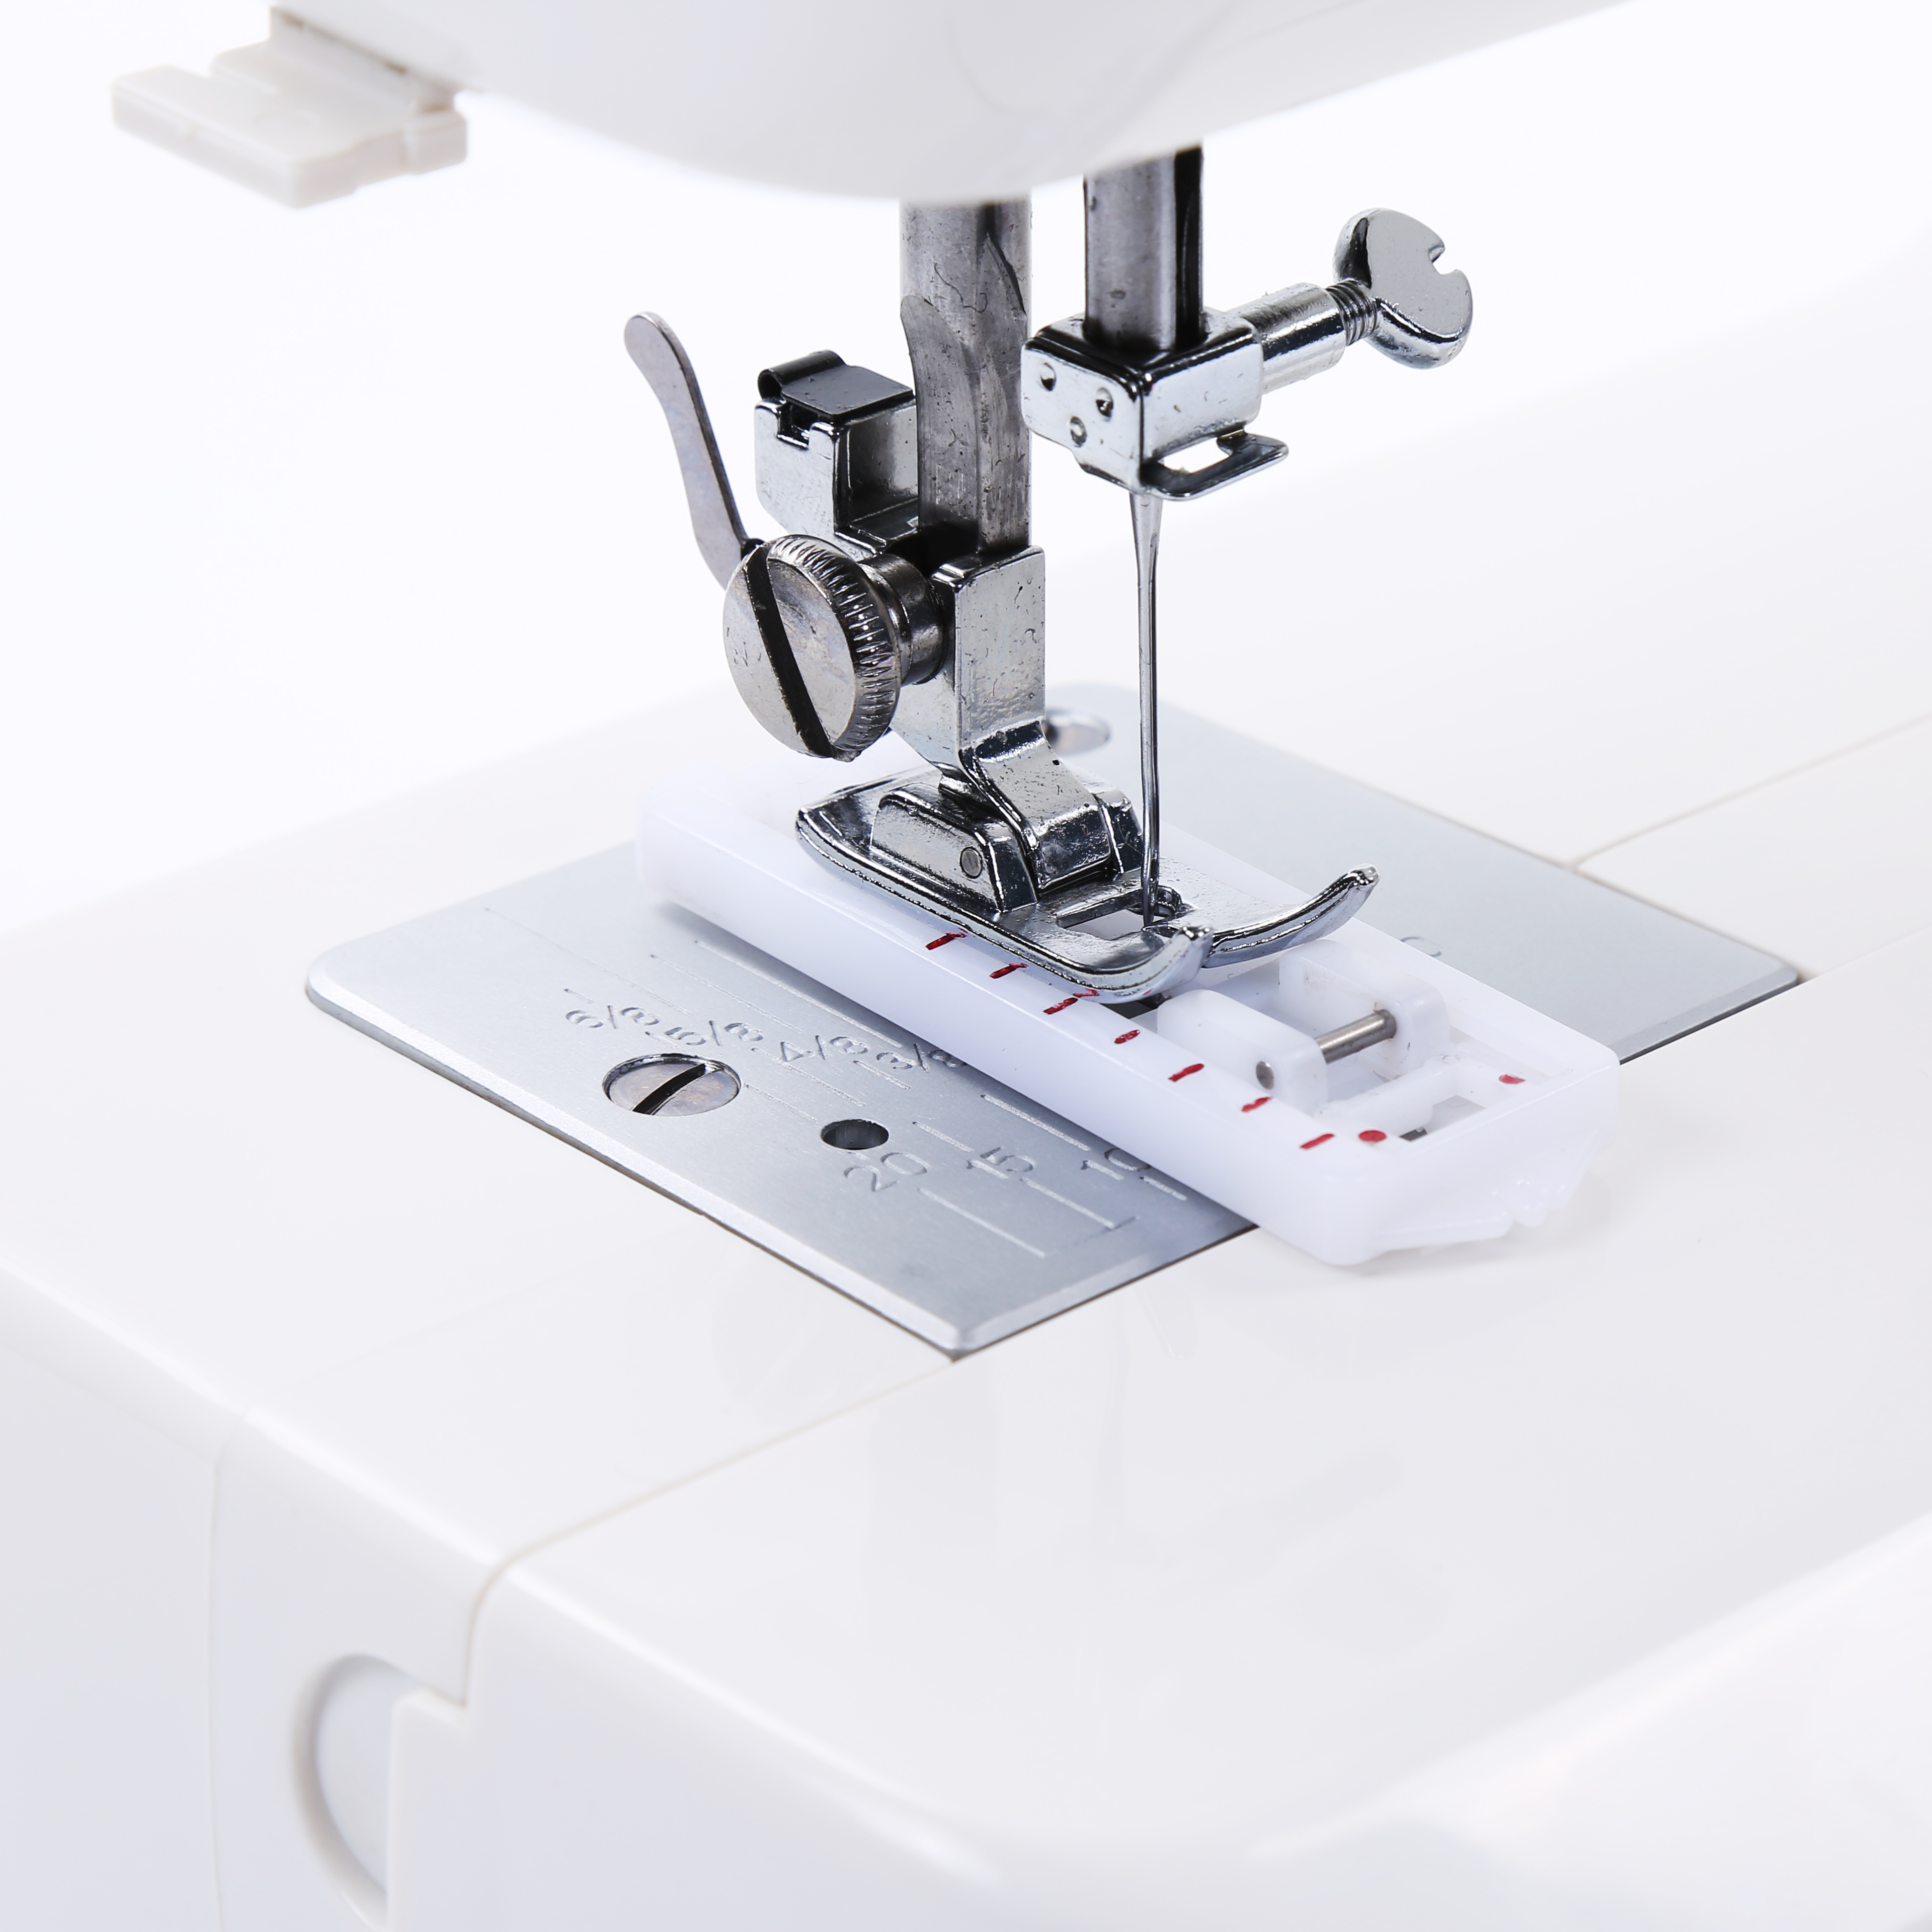 BAI Sewing Machine Household Brother Zoyer Zy 988 5dab 5 Thread for Household